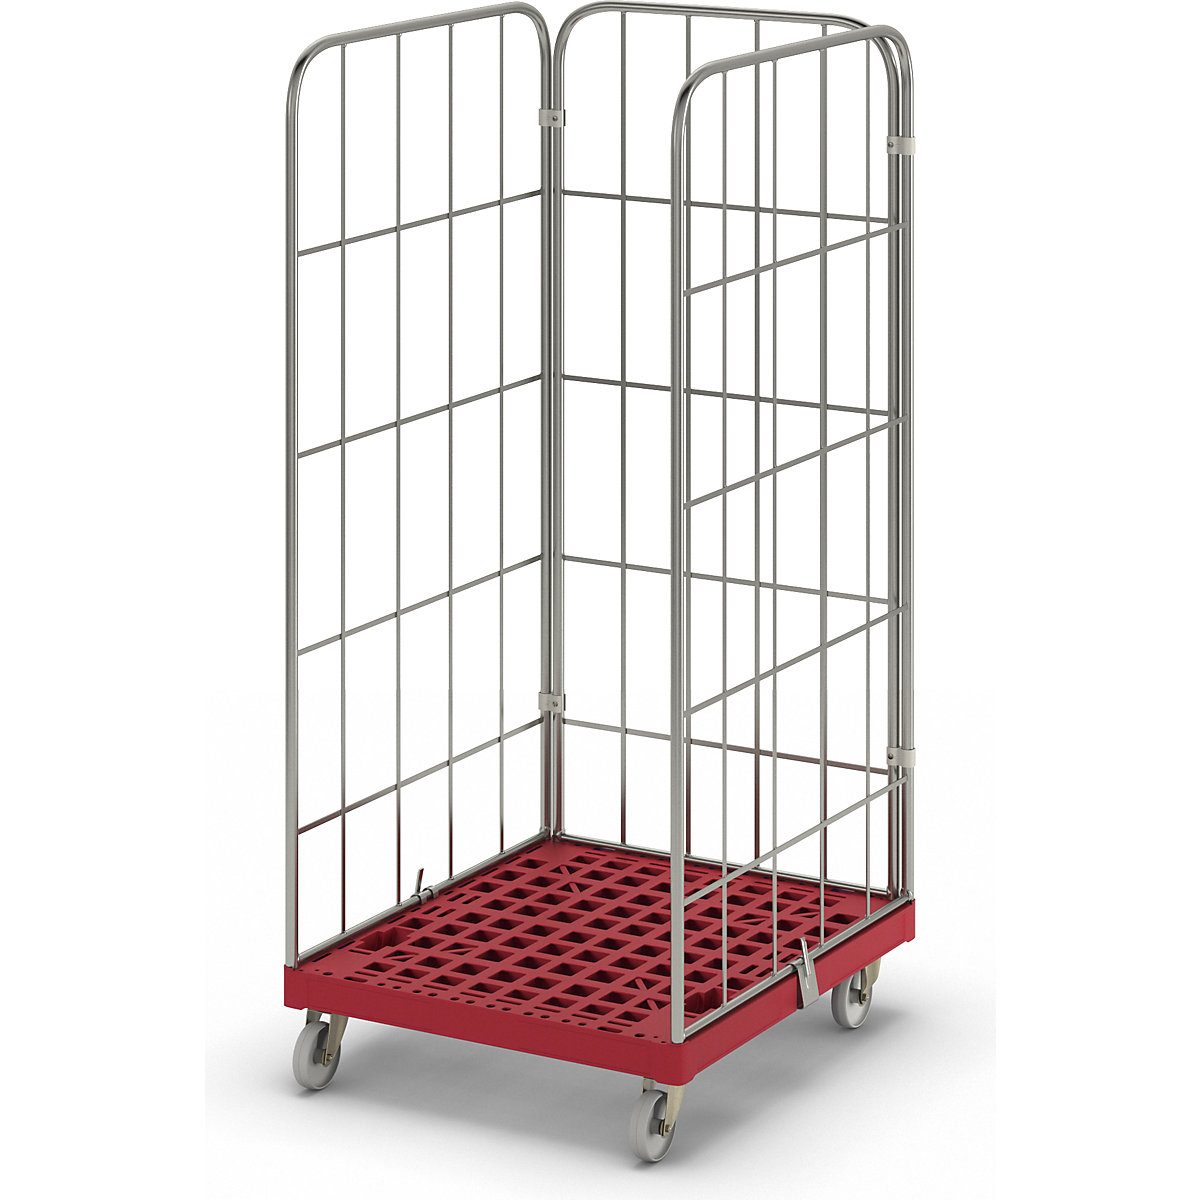 MODULAR roll container, plastic transport dolly, mesh on 3 sides, red dolly-2